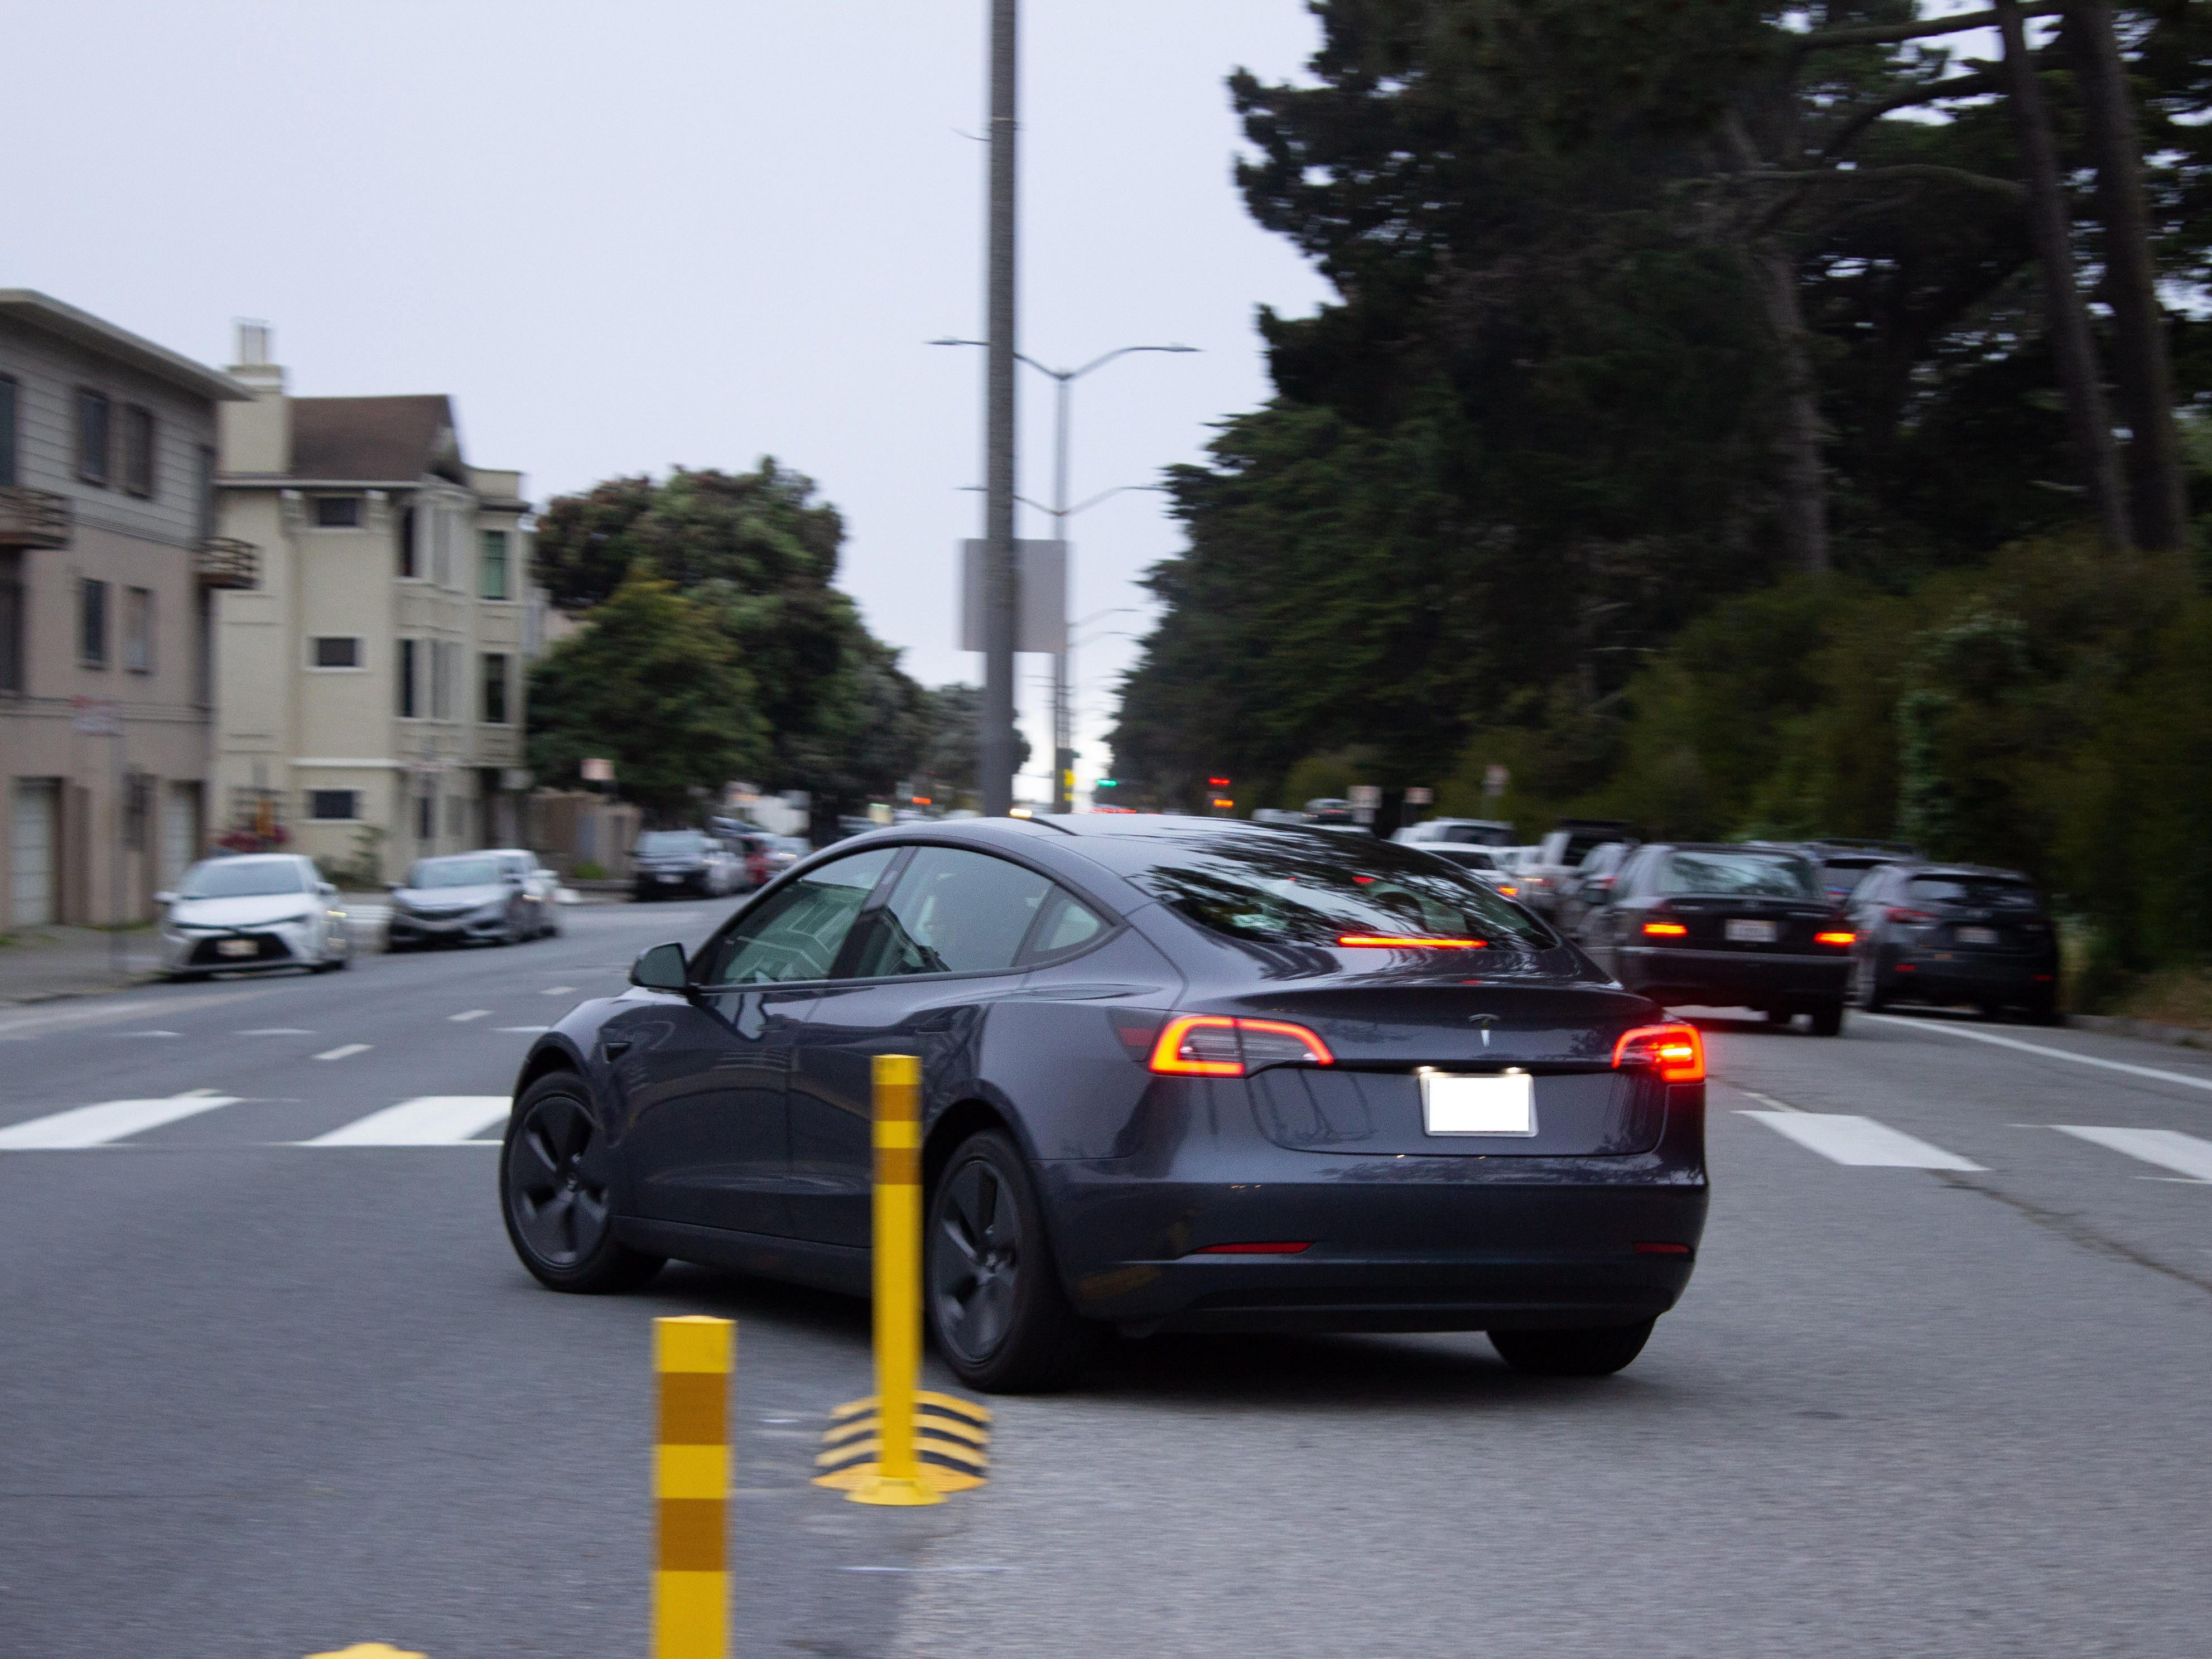 microsoft, these are the kinds of san francisco roads tesla's fsd had a hard time dealing with, report says